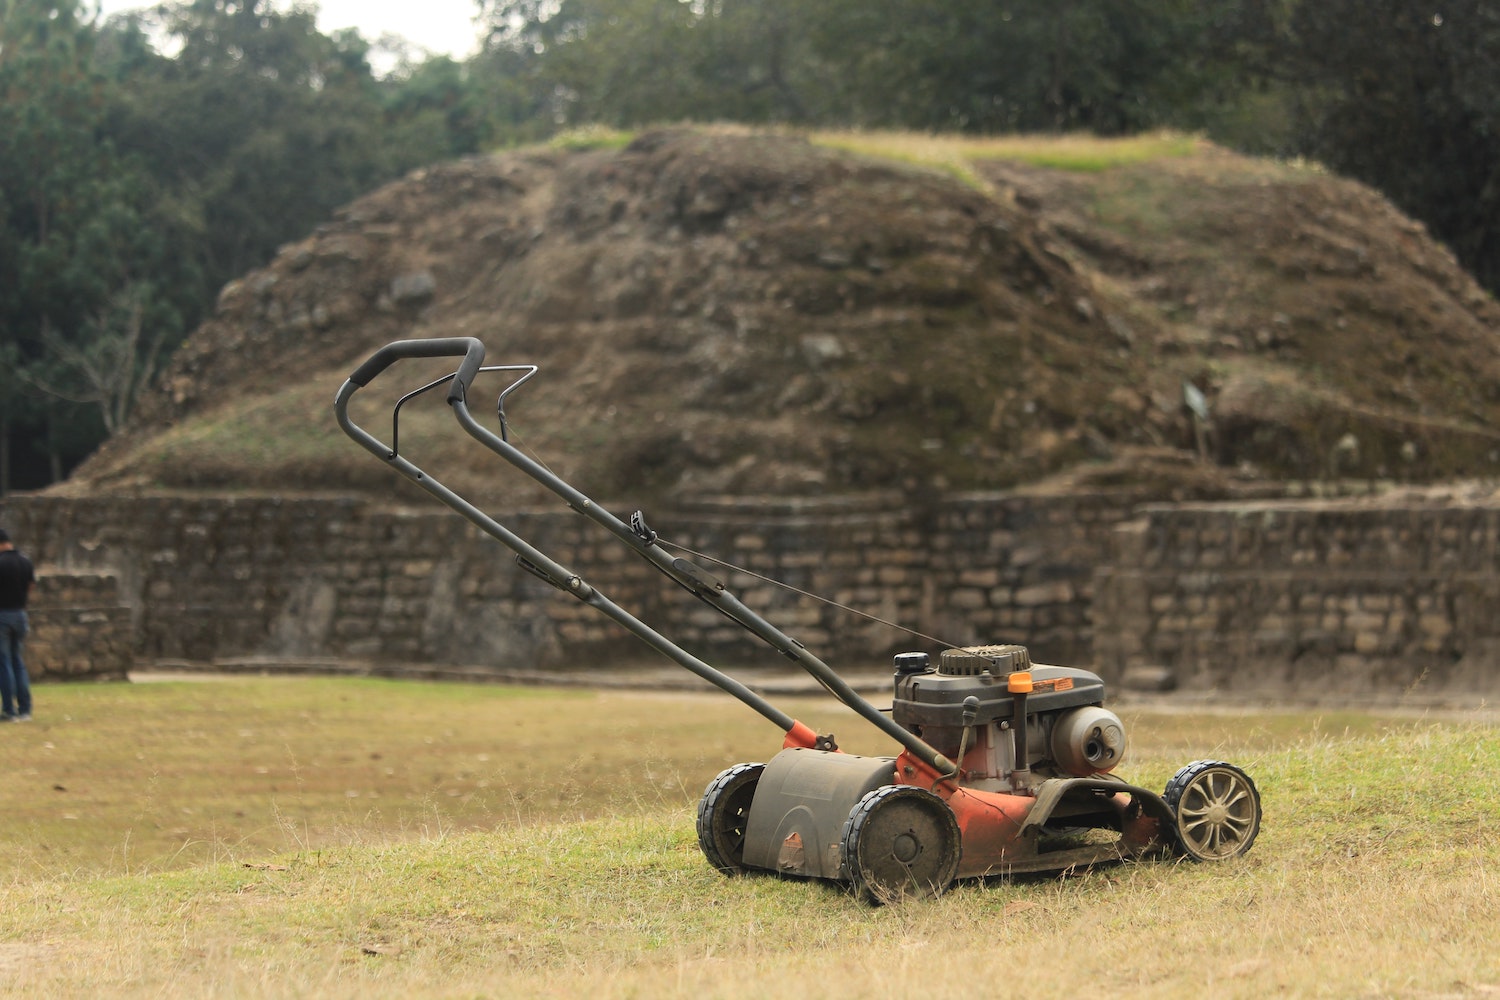 Walk-behind push lawn mower parked in front of a stone retaining wall on a freshly mowed lawn.